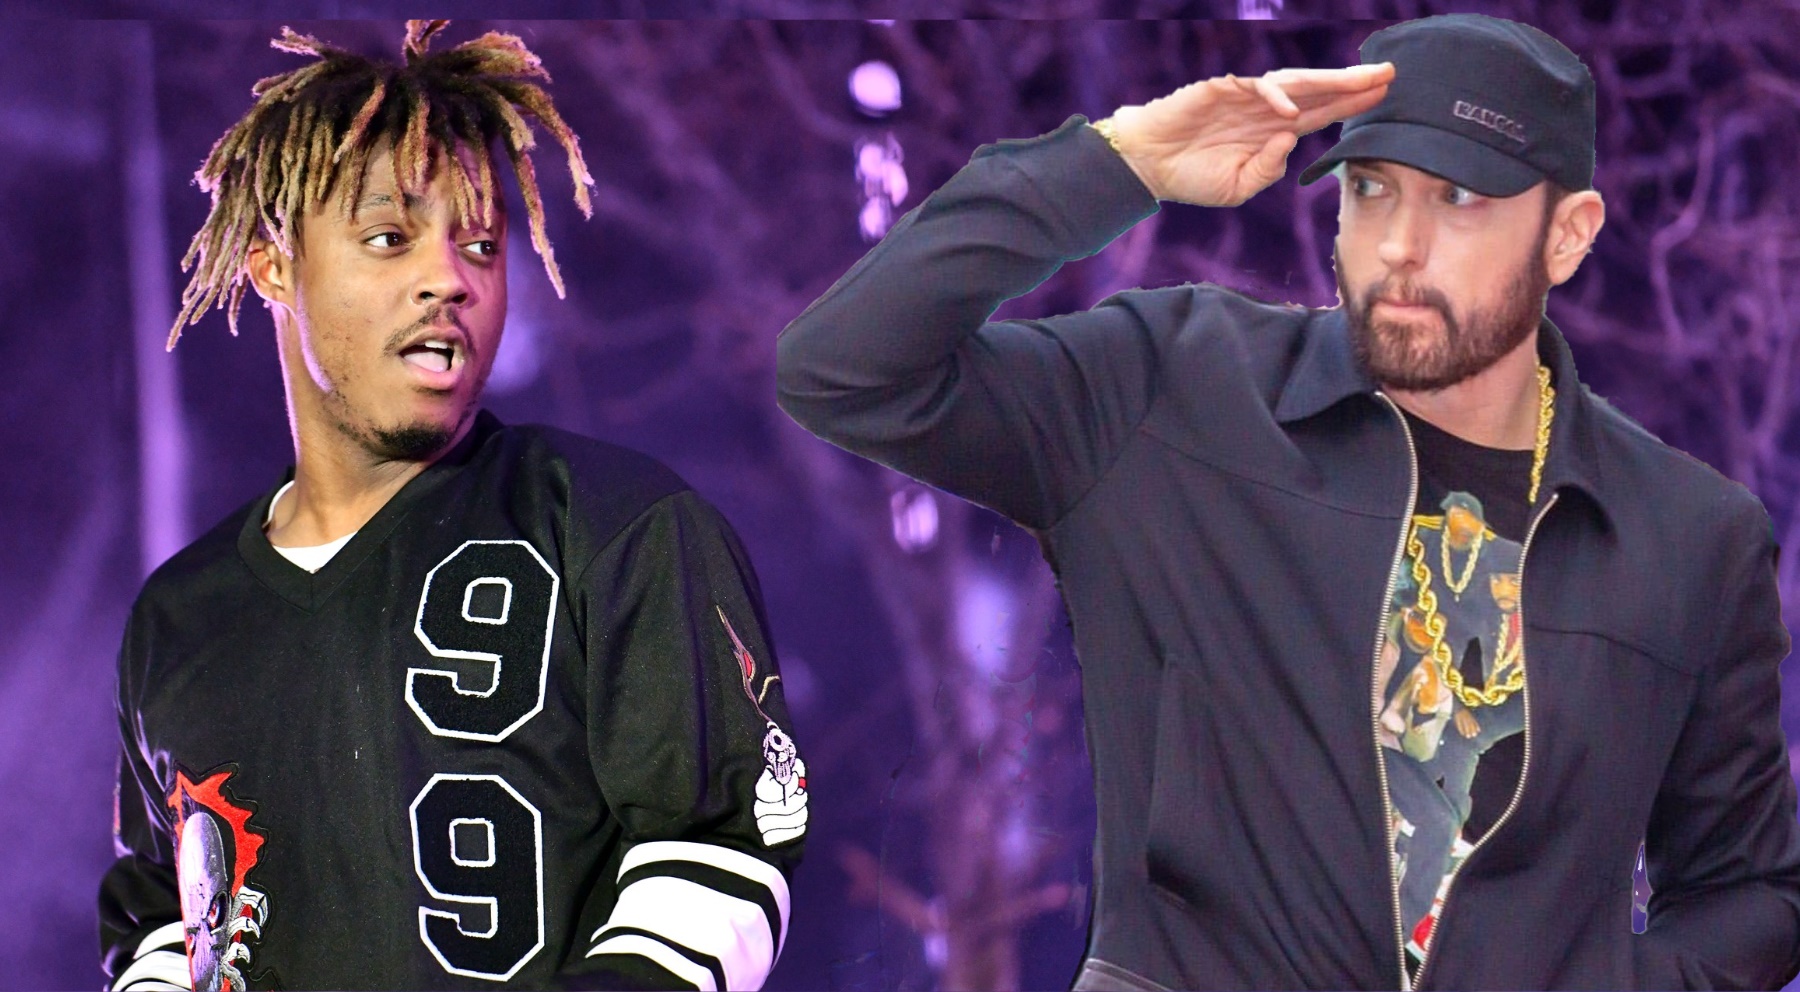 Juice WRLD's Joint With Eminem is the Highest New Entry on Spotify Chart